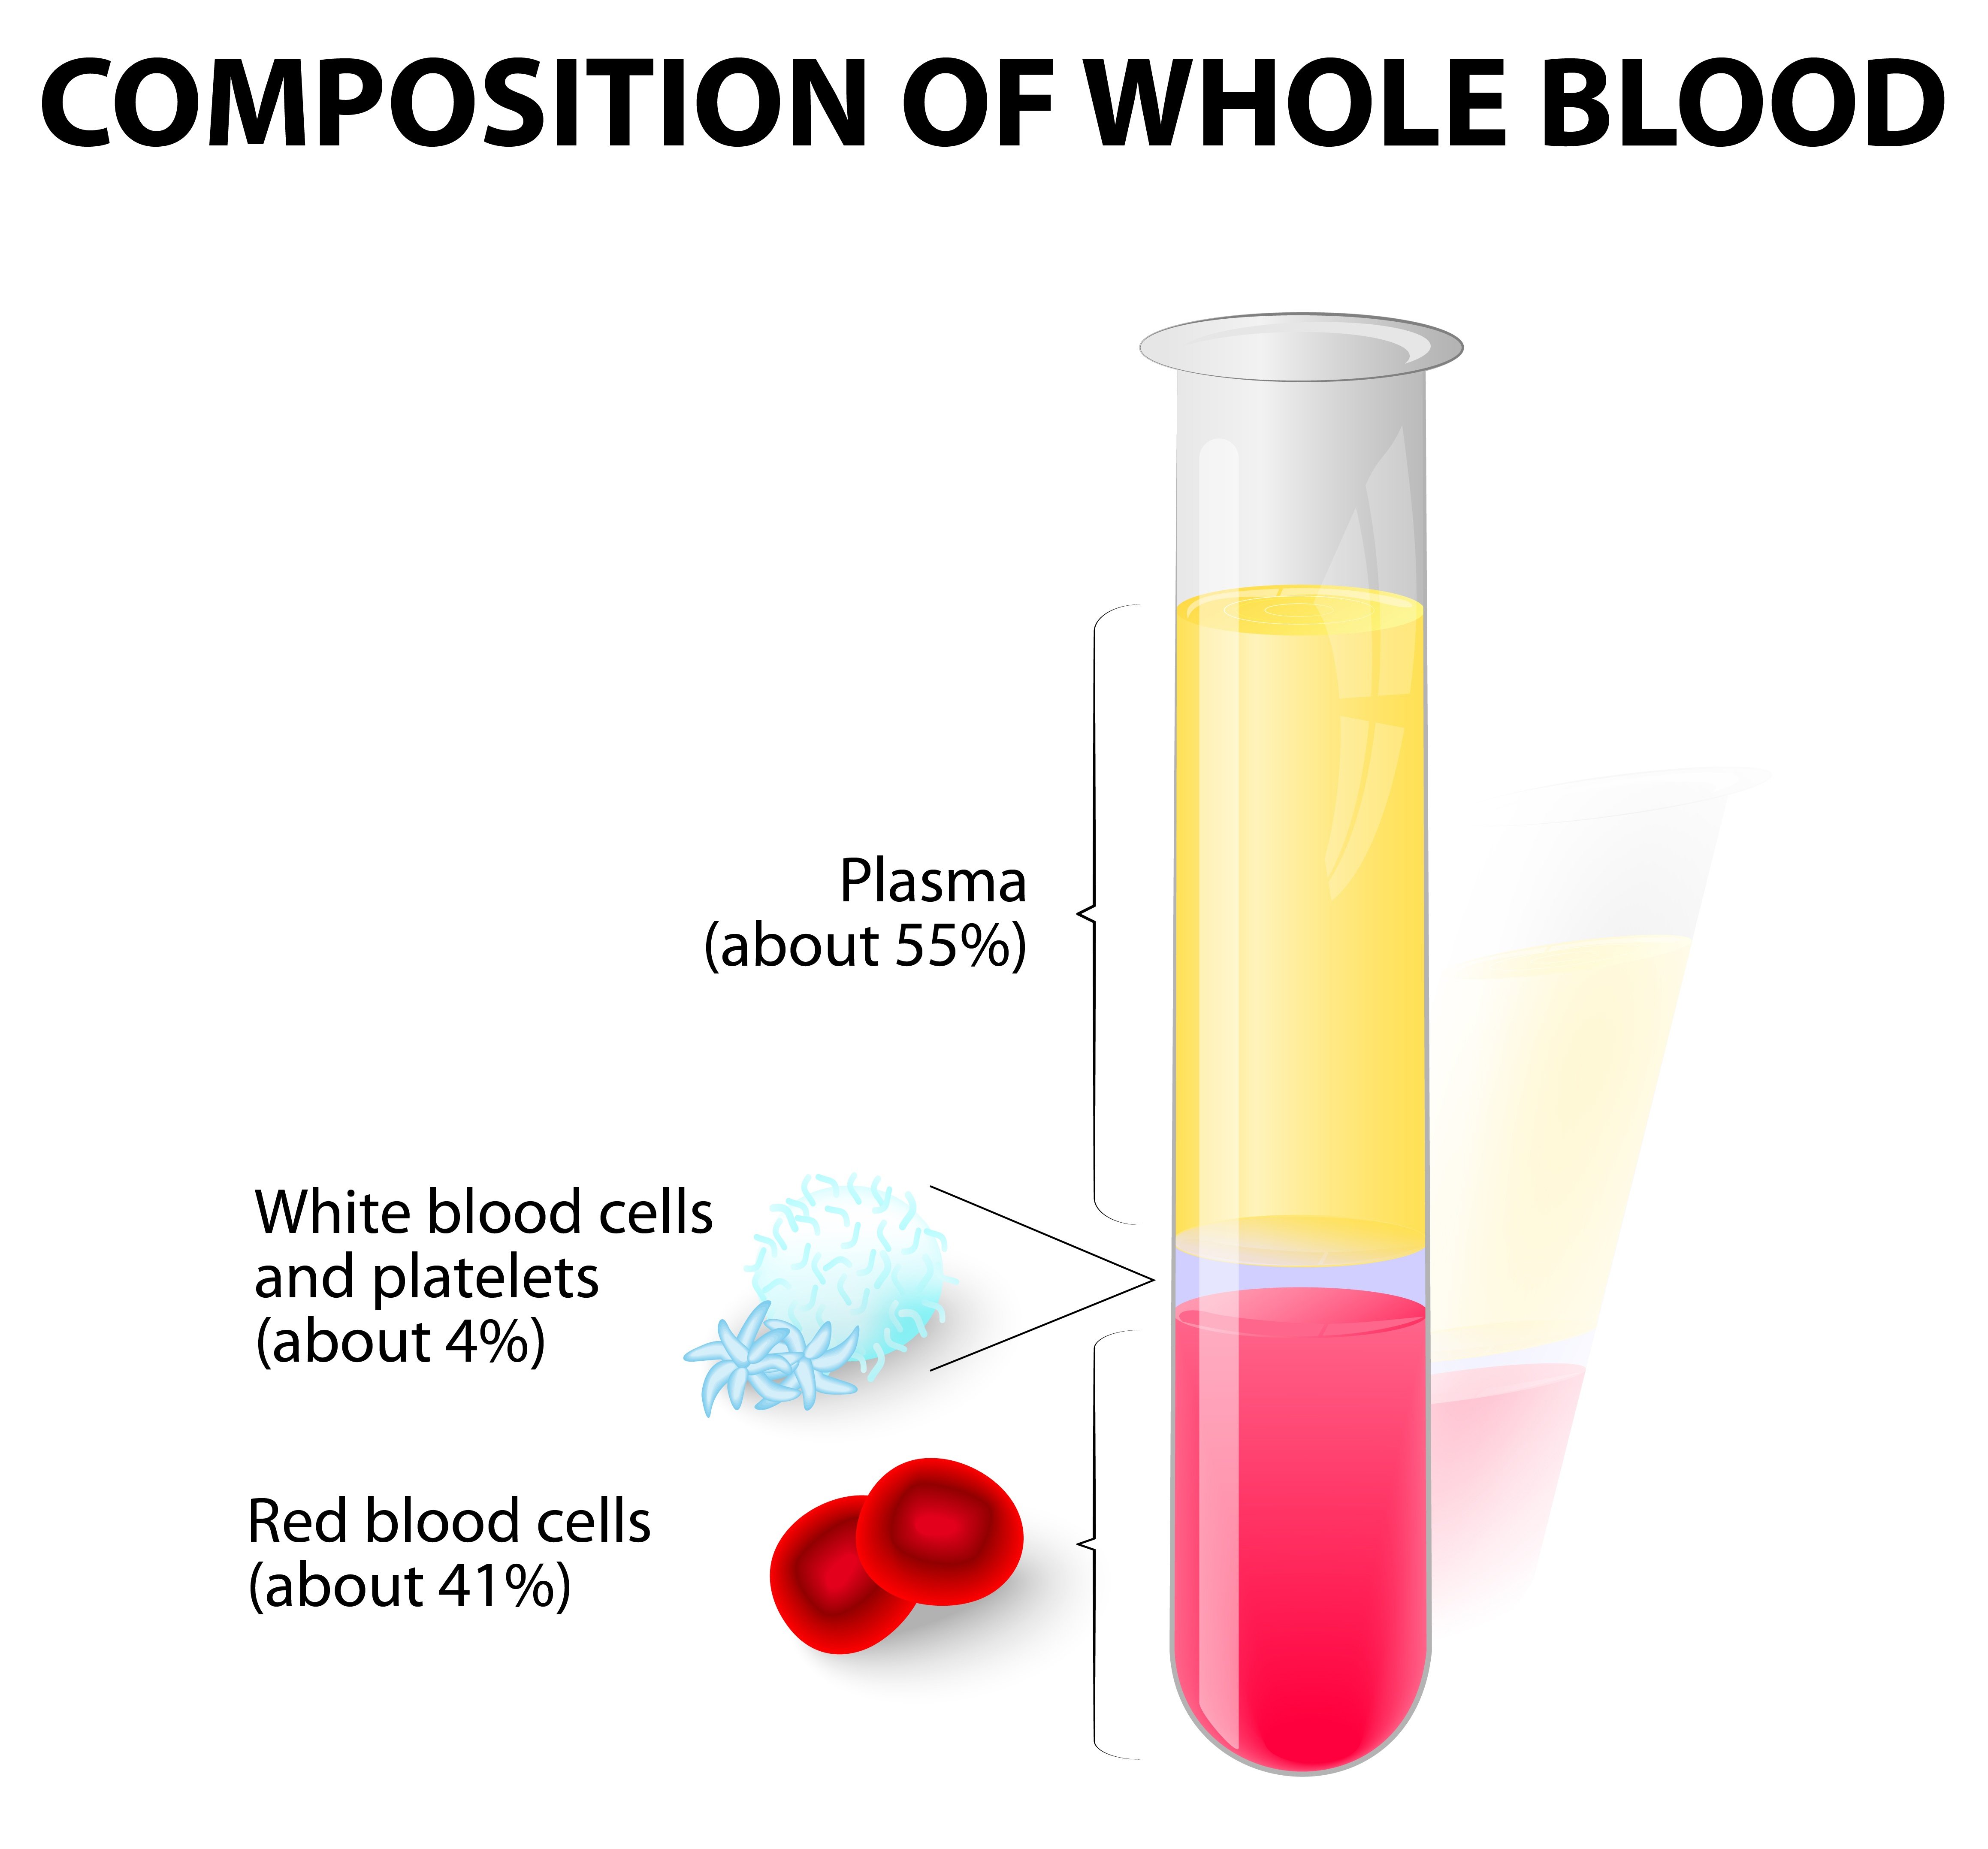 hematocrict effect in blood